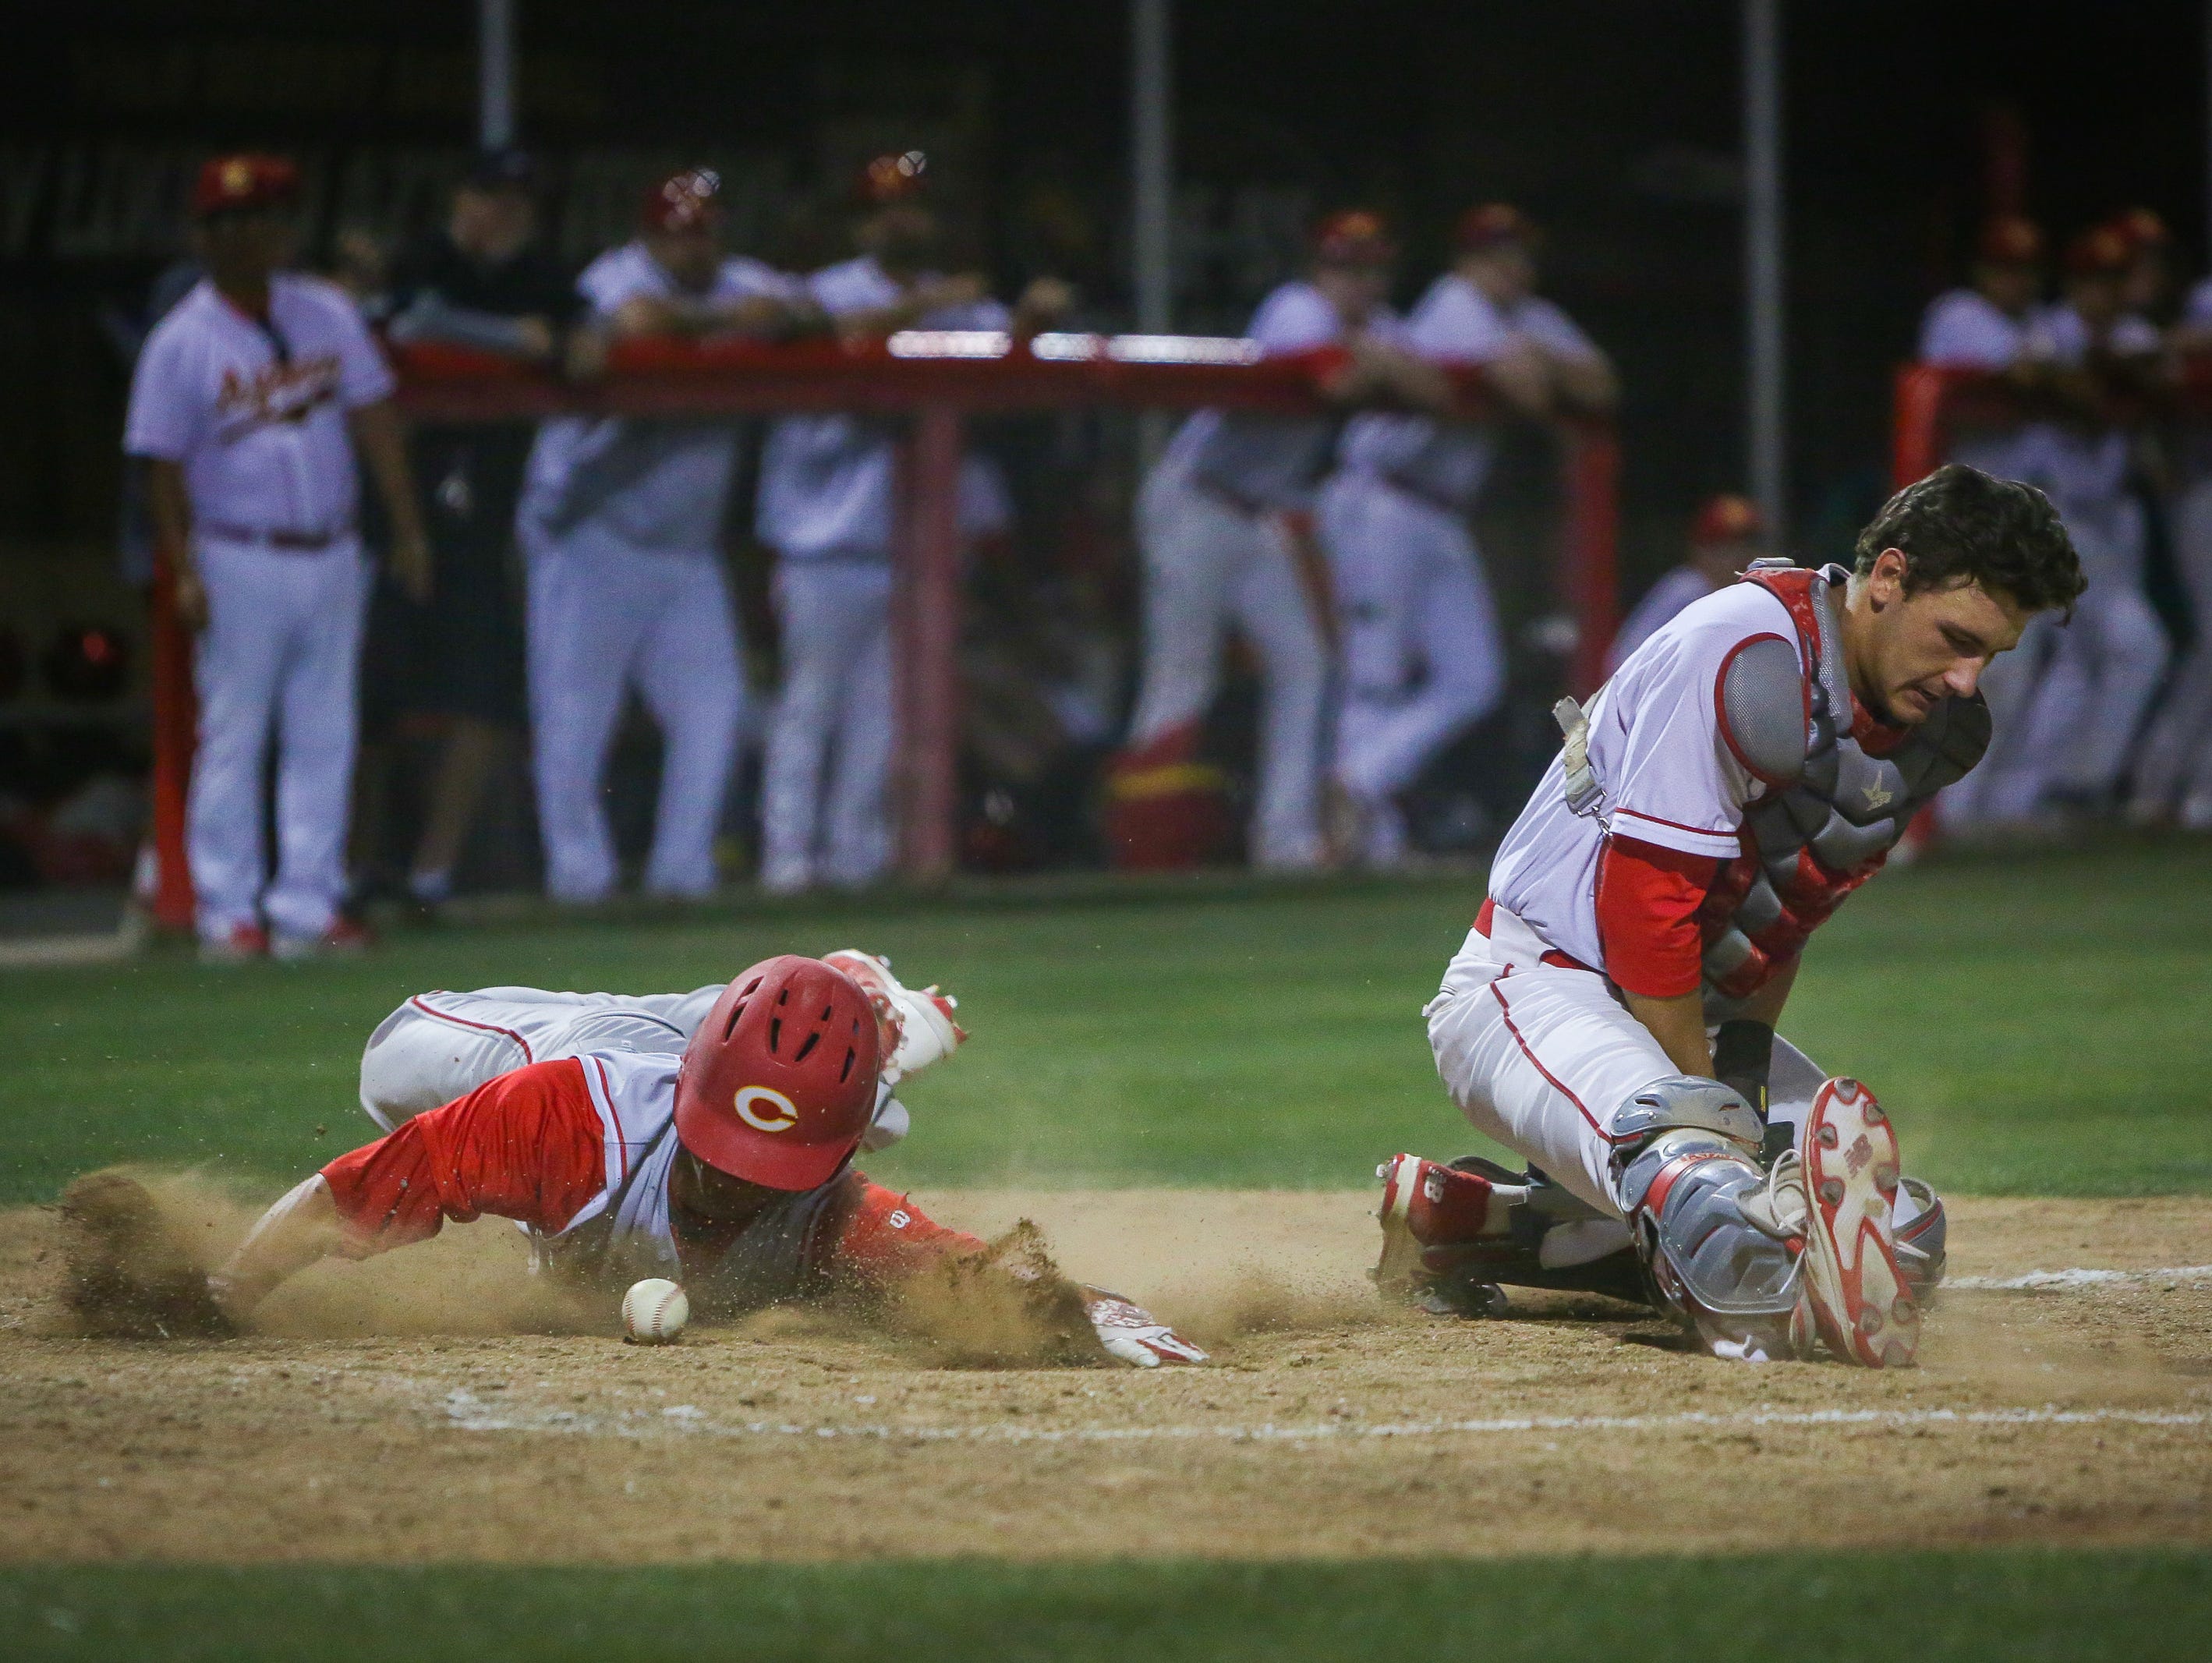 Corona's Chase Robison slides and scores.